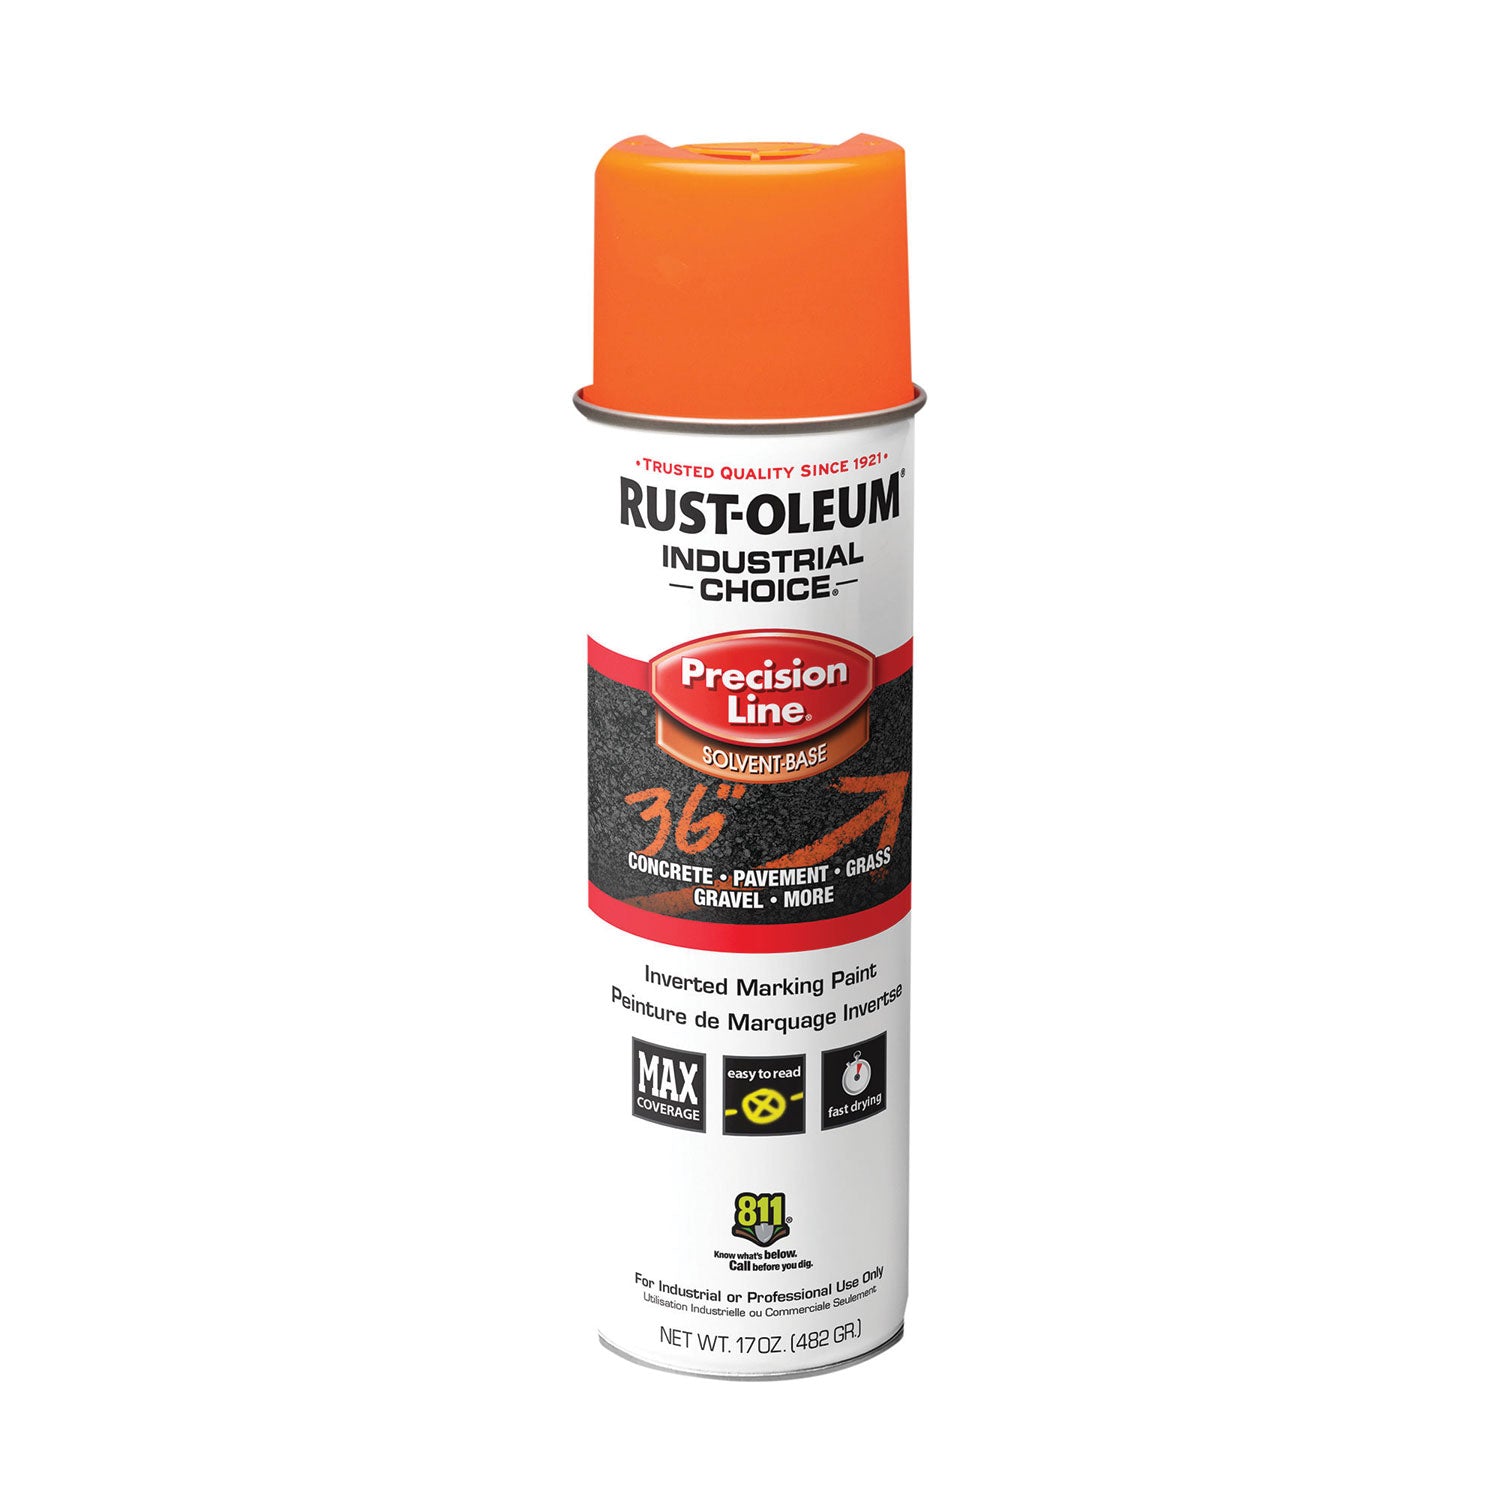 industrial-choice-m1600-system-solvent-based-precision-line-marking-paint-flat-fluorescent-orange-17-oz-aerosol-can-12-ct_rst203027v - 1